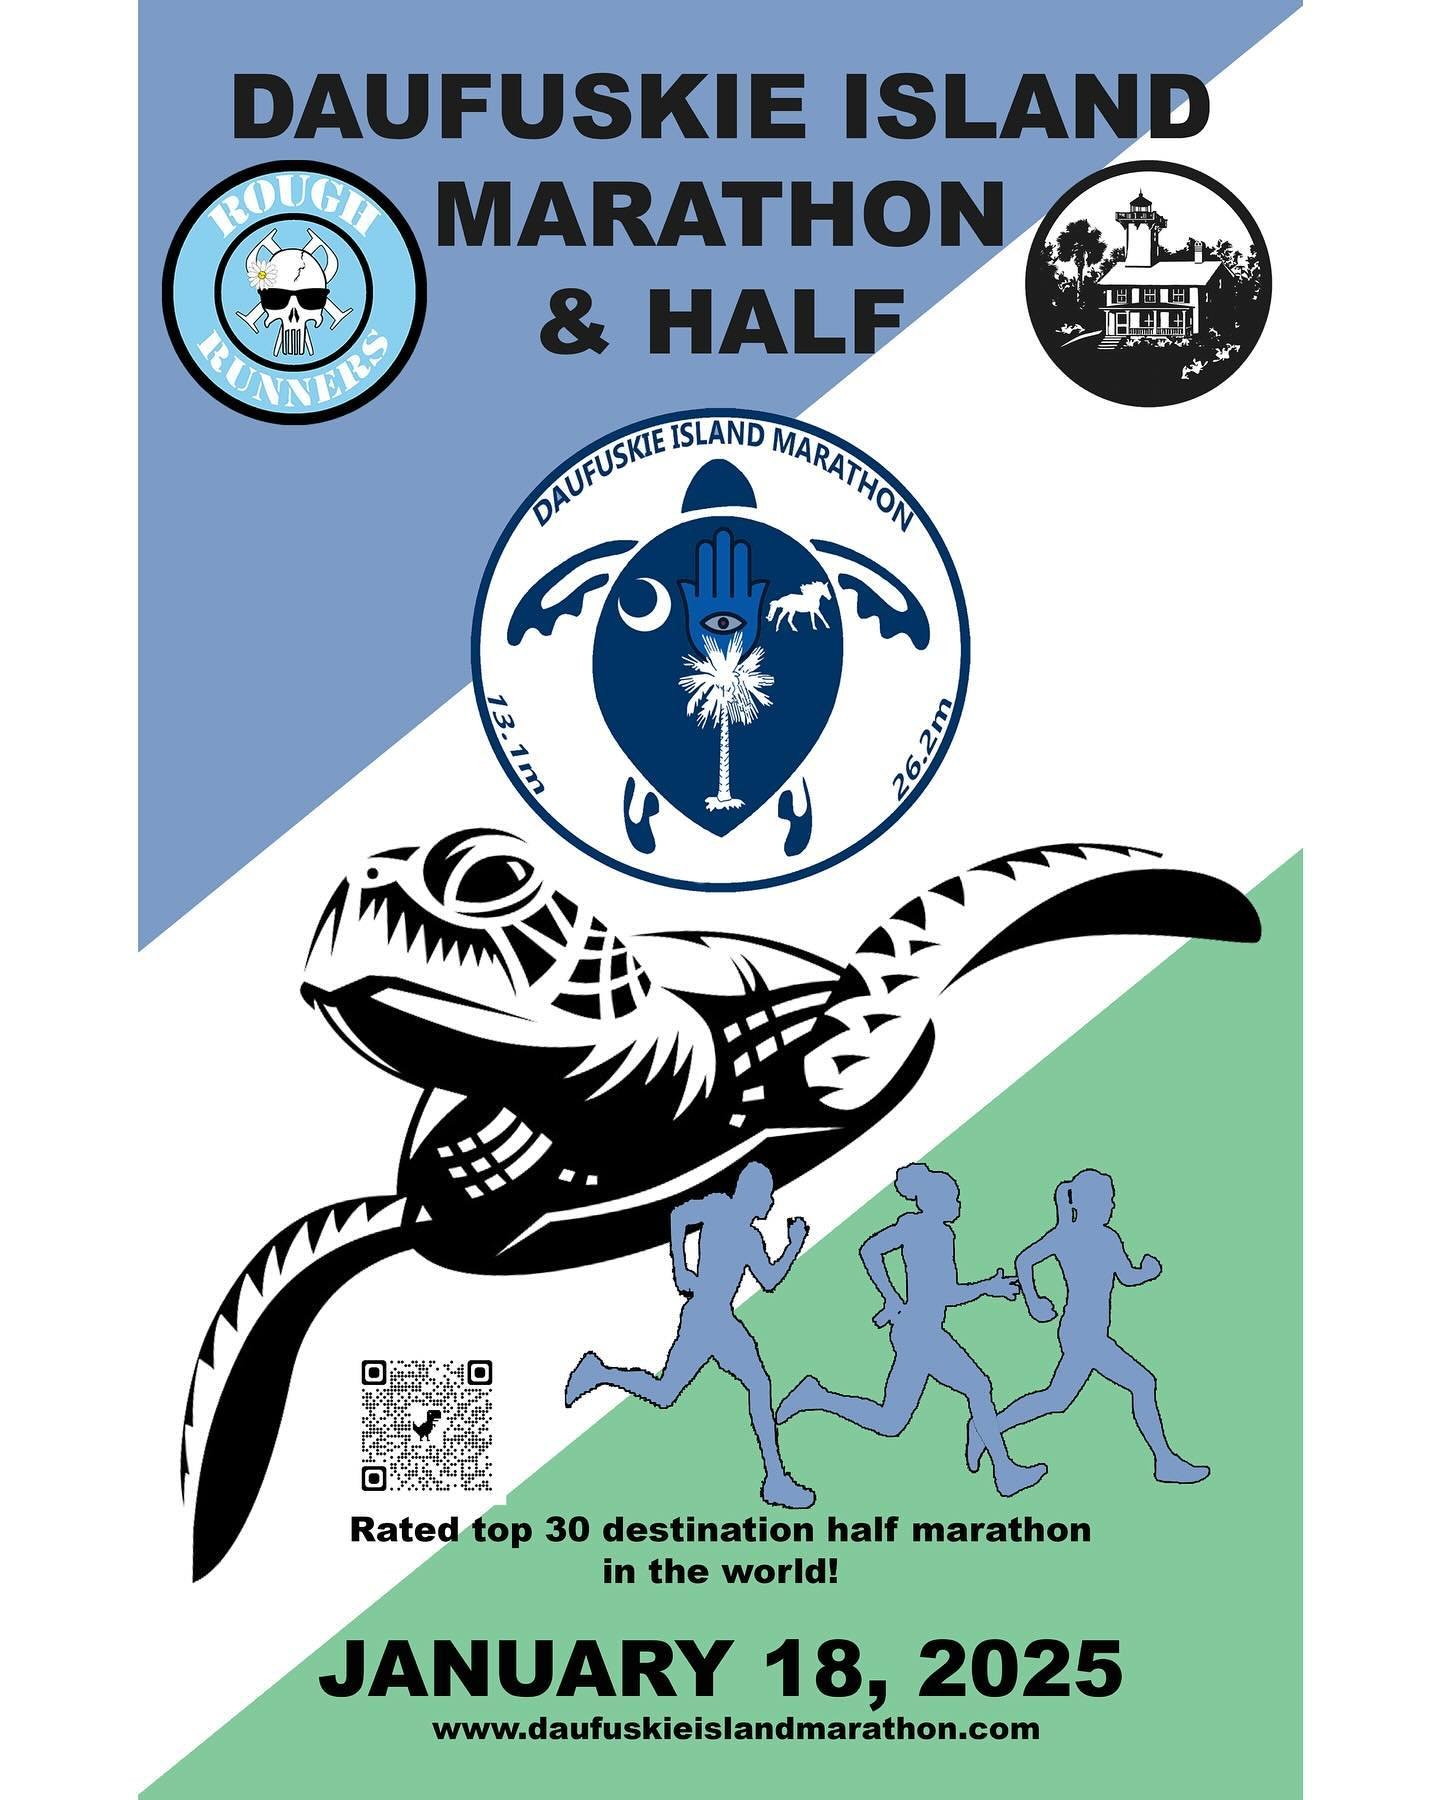 Happy Thursday!
Hope your week is going swell!
Happy almost weekend!
We welcome the following runners to the Daufuskie Island Marathon family! 
It is so awesome to have veteran Daufuskie Island marathoner, Maggie back for an 8th time! Maggie was last